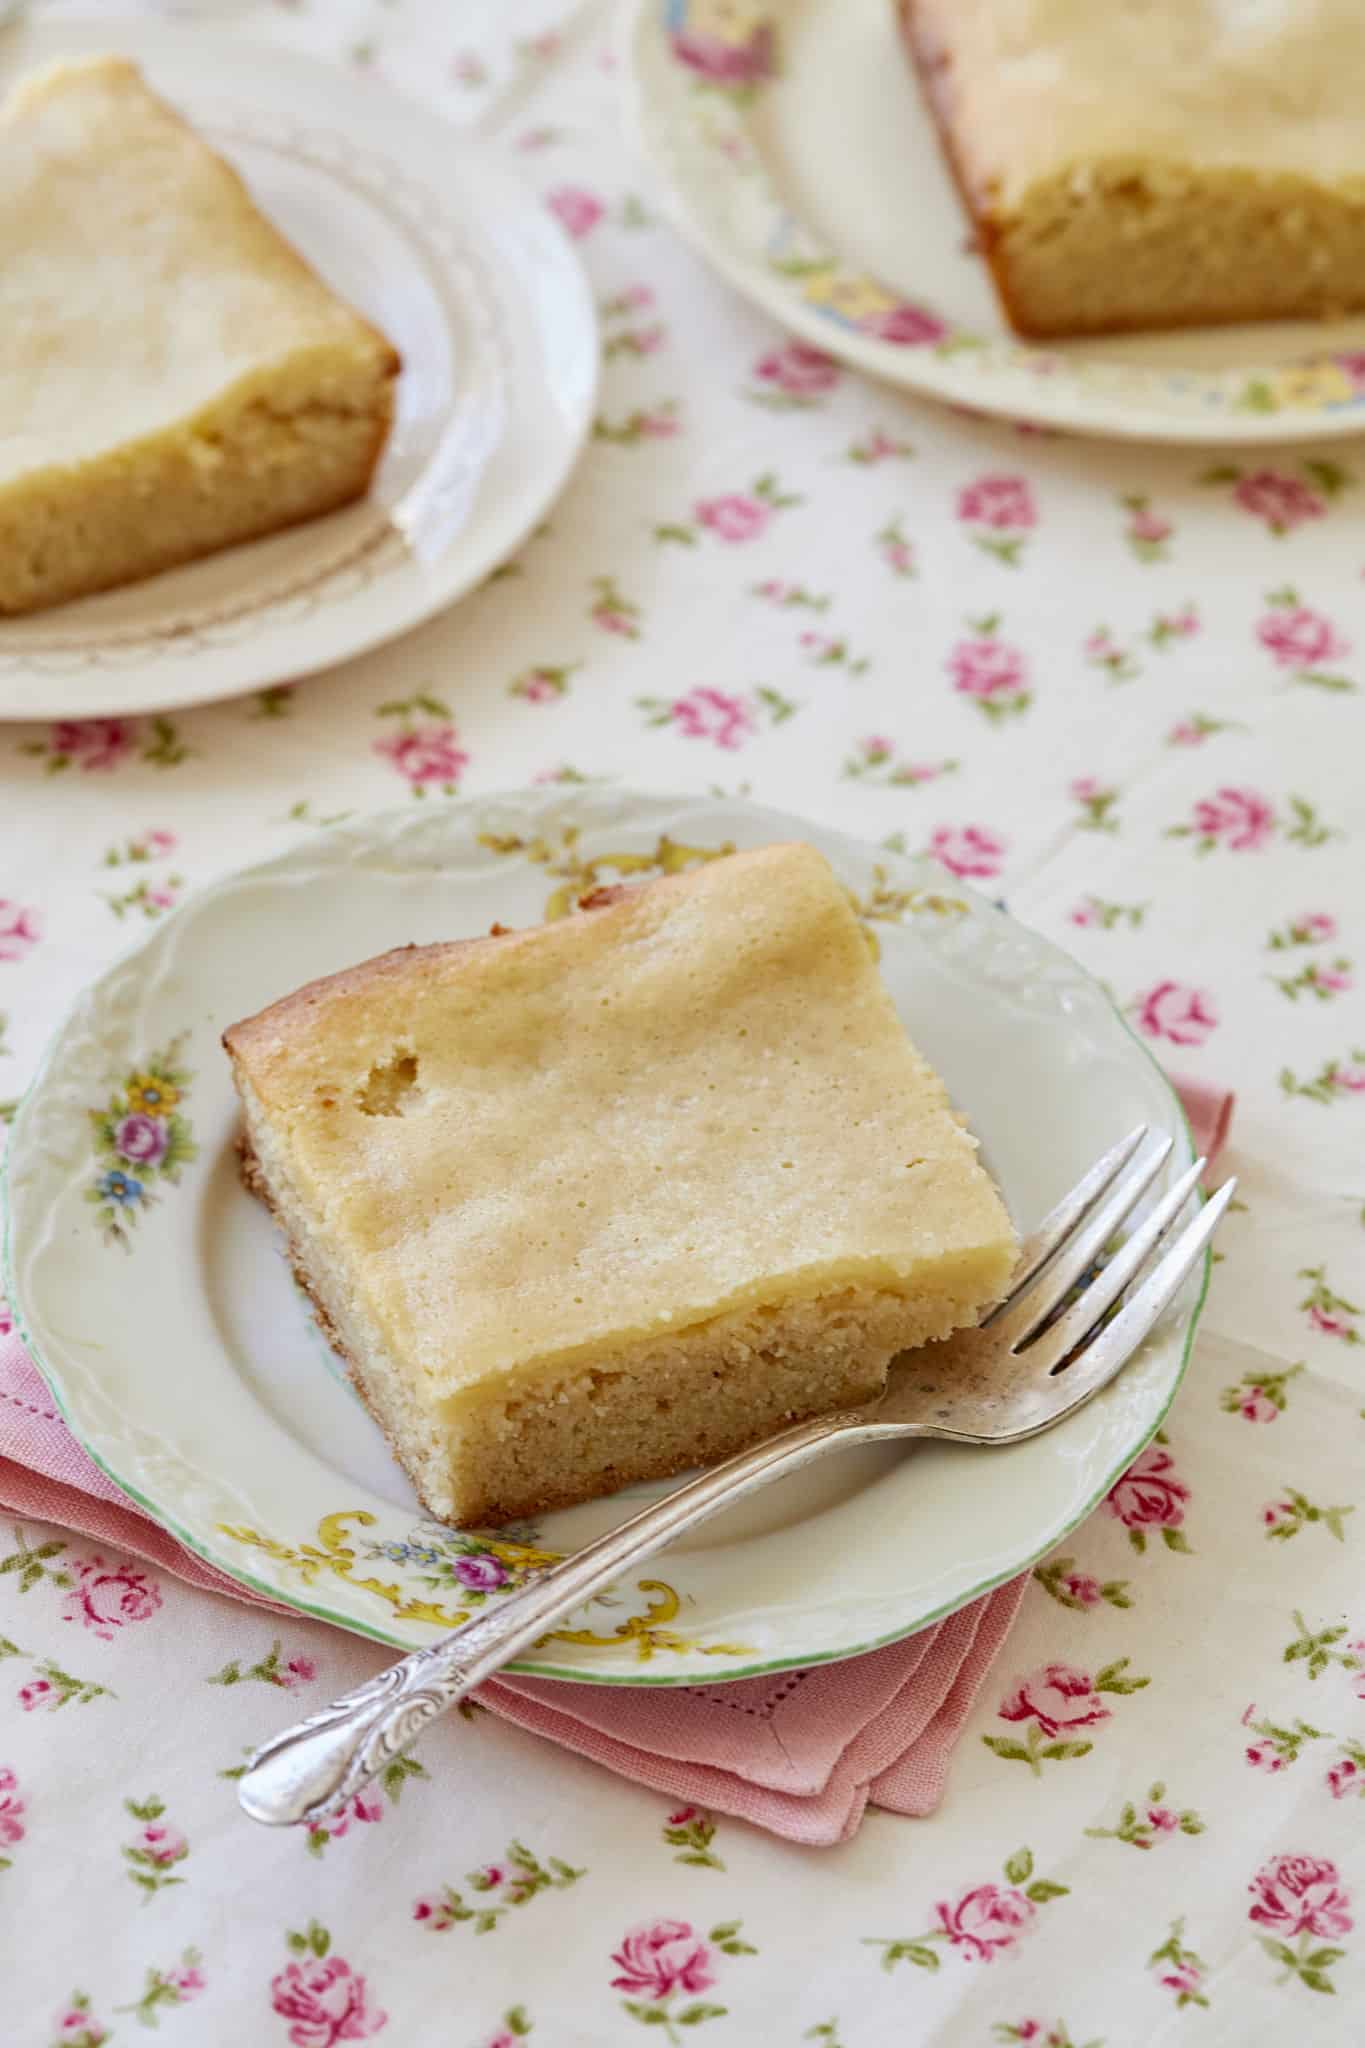 Three pieces of maple gooey butter cake on individual white plates with a fork, on top of pink napkins and a floral tablecloth.